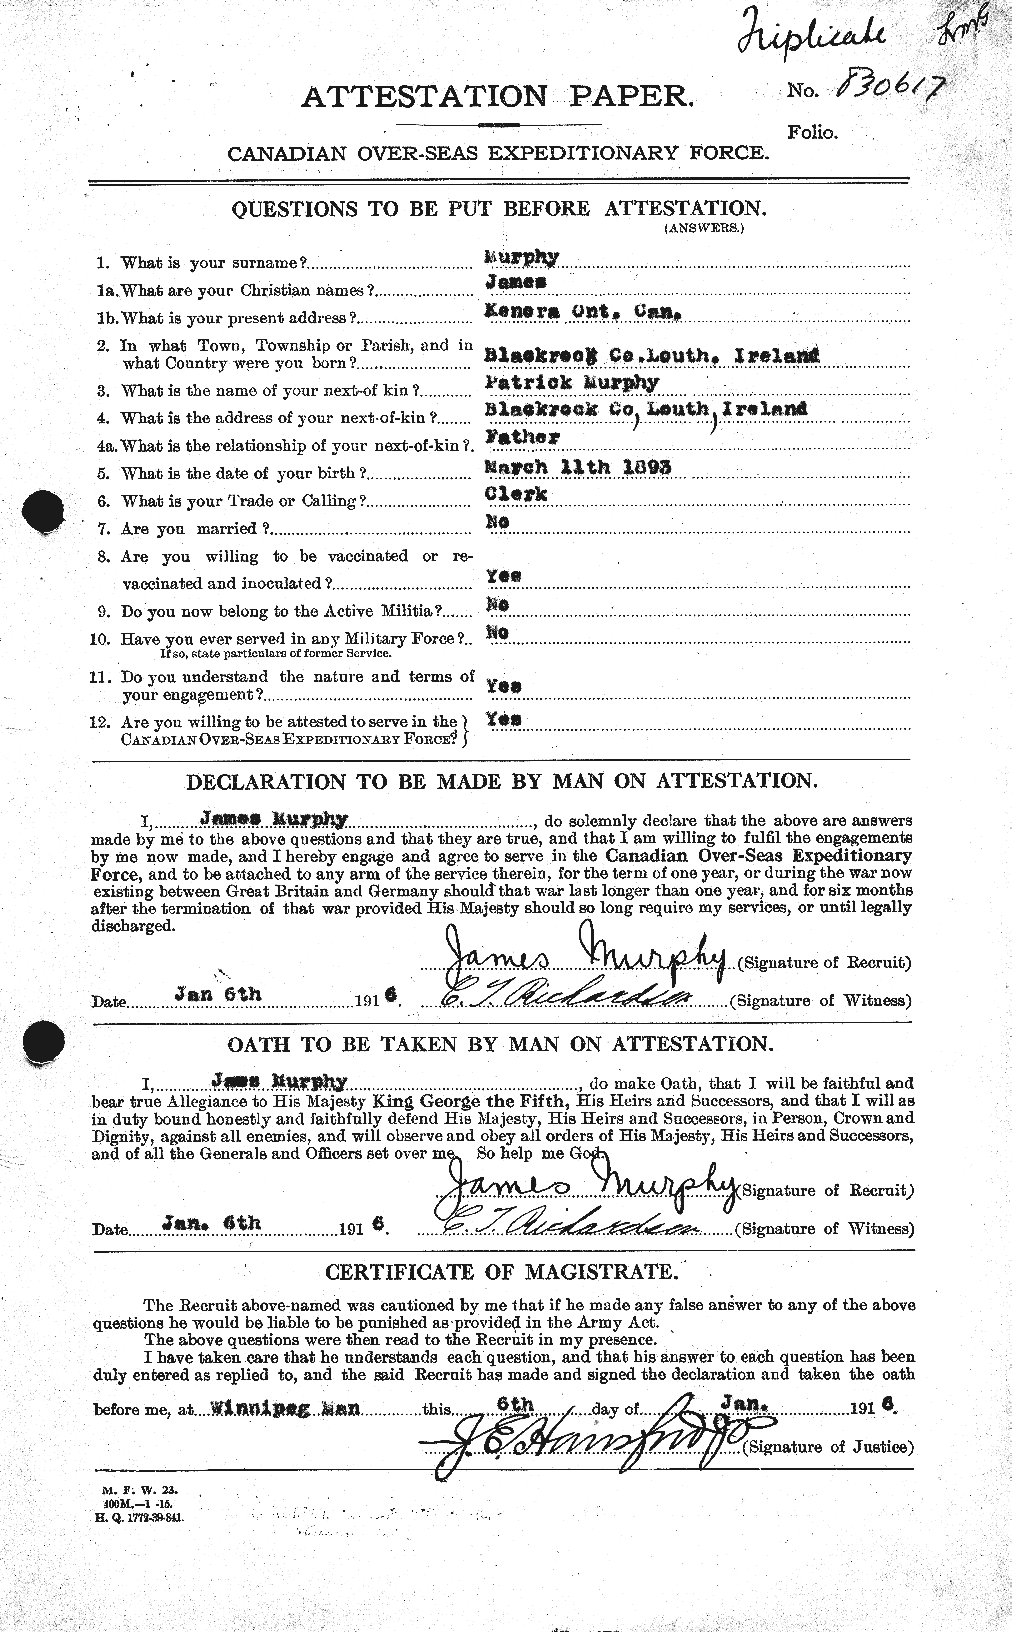 Personnel Records of the First World War - CEF 514577a